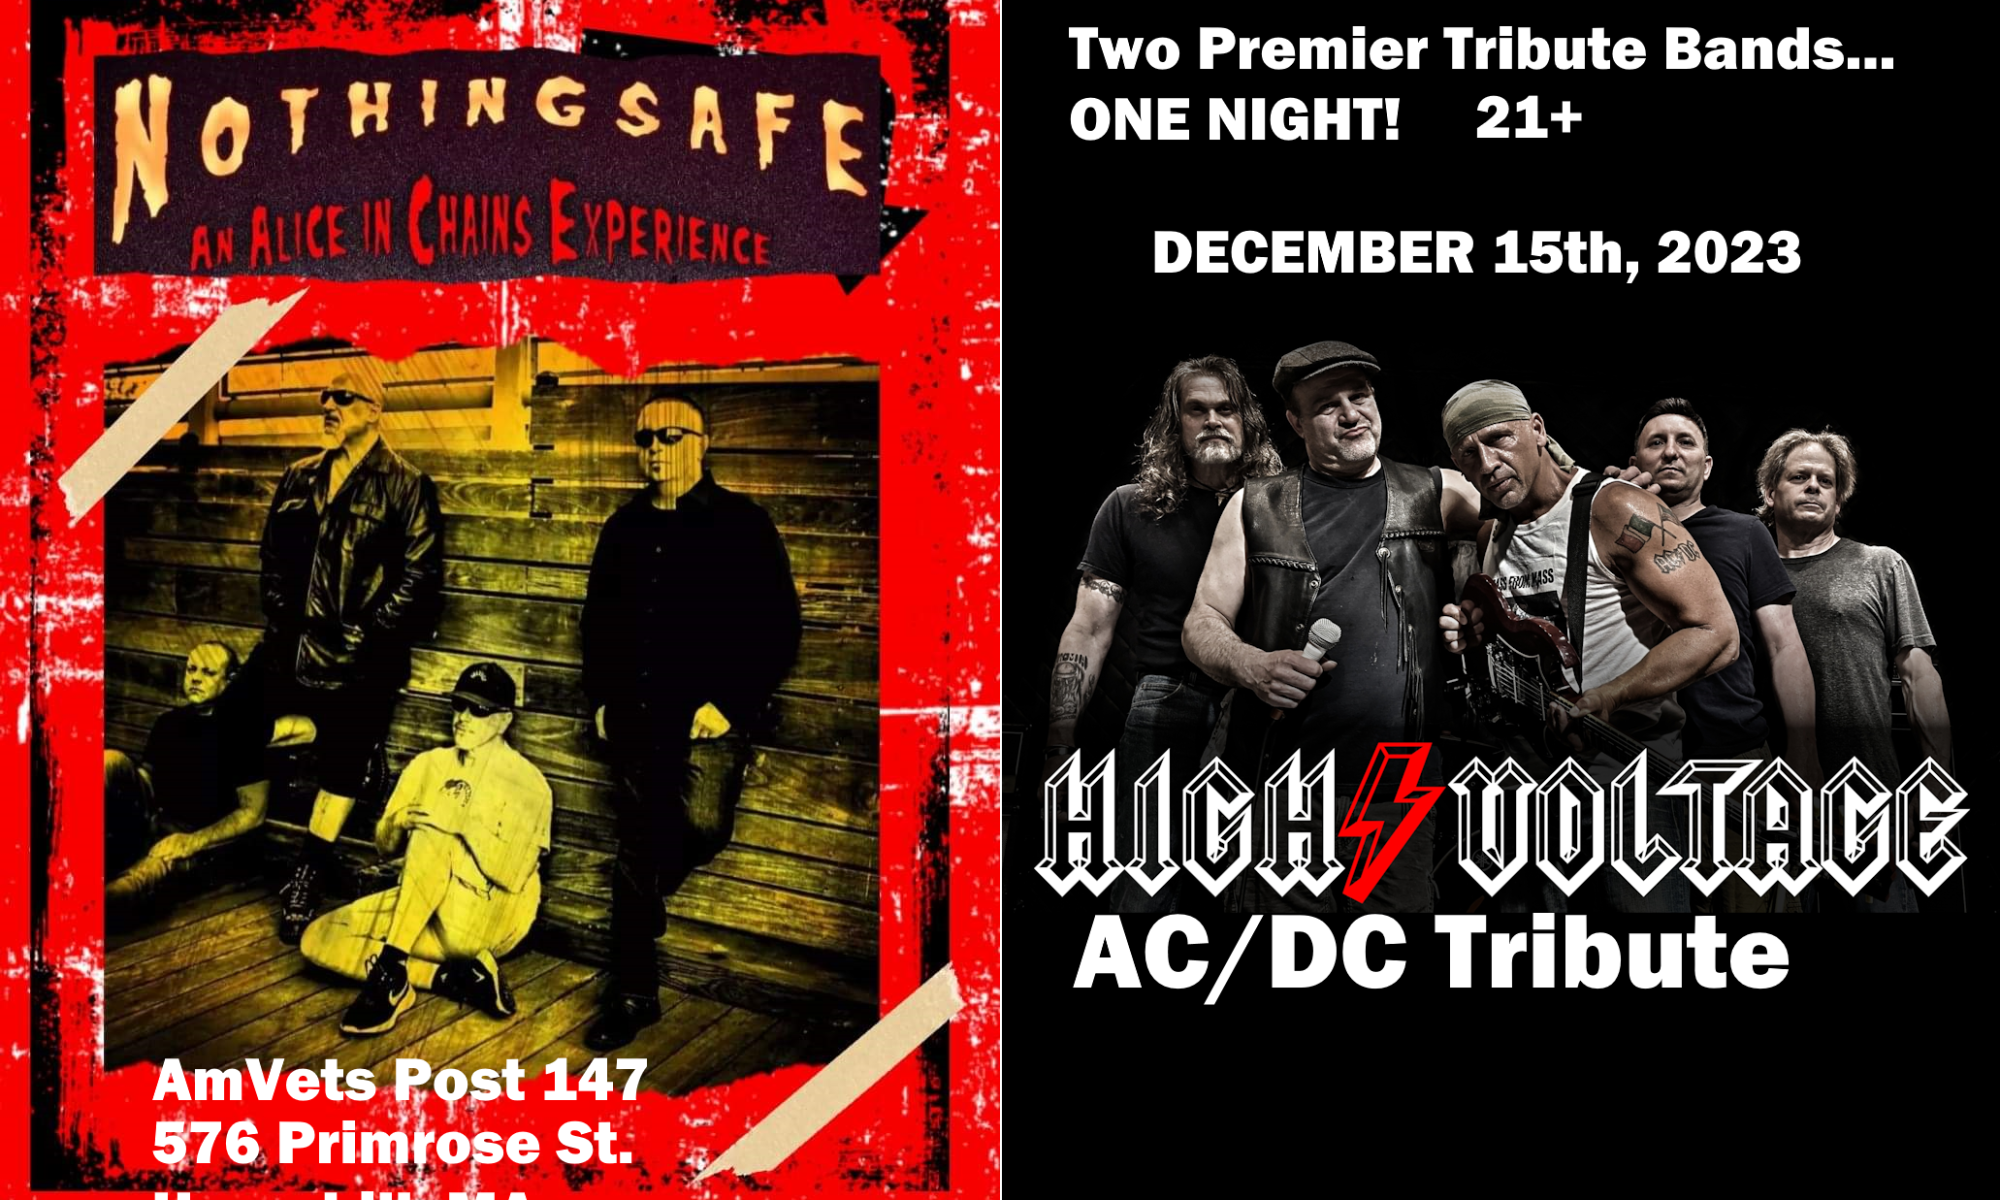 AC/DC and Alice In Chains Tribute bands at Amvets Post 147 Haverhill MA